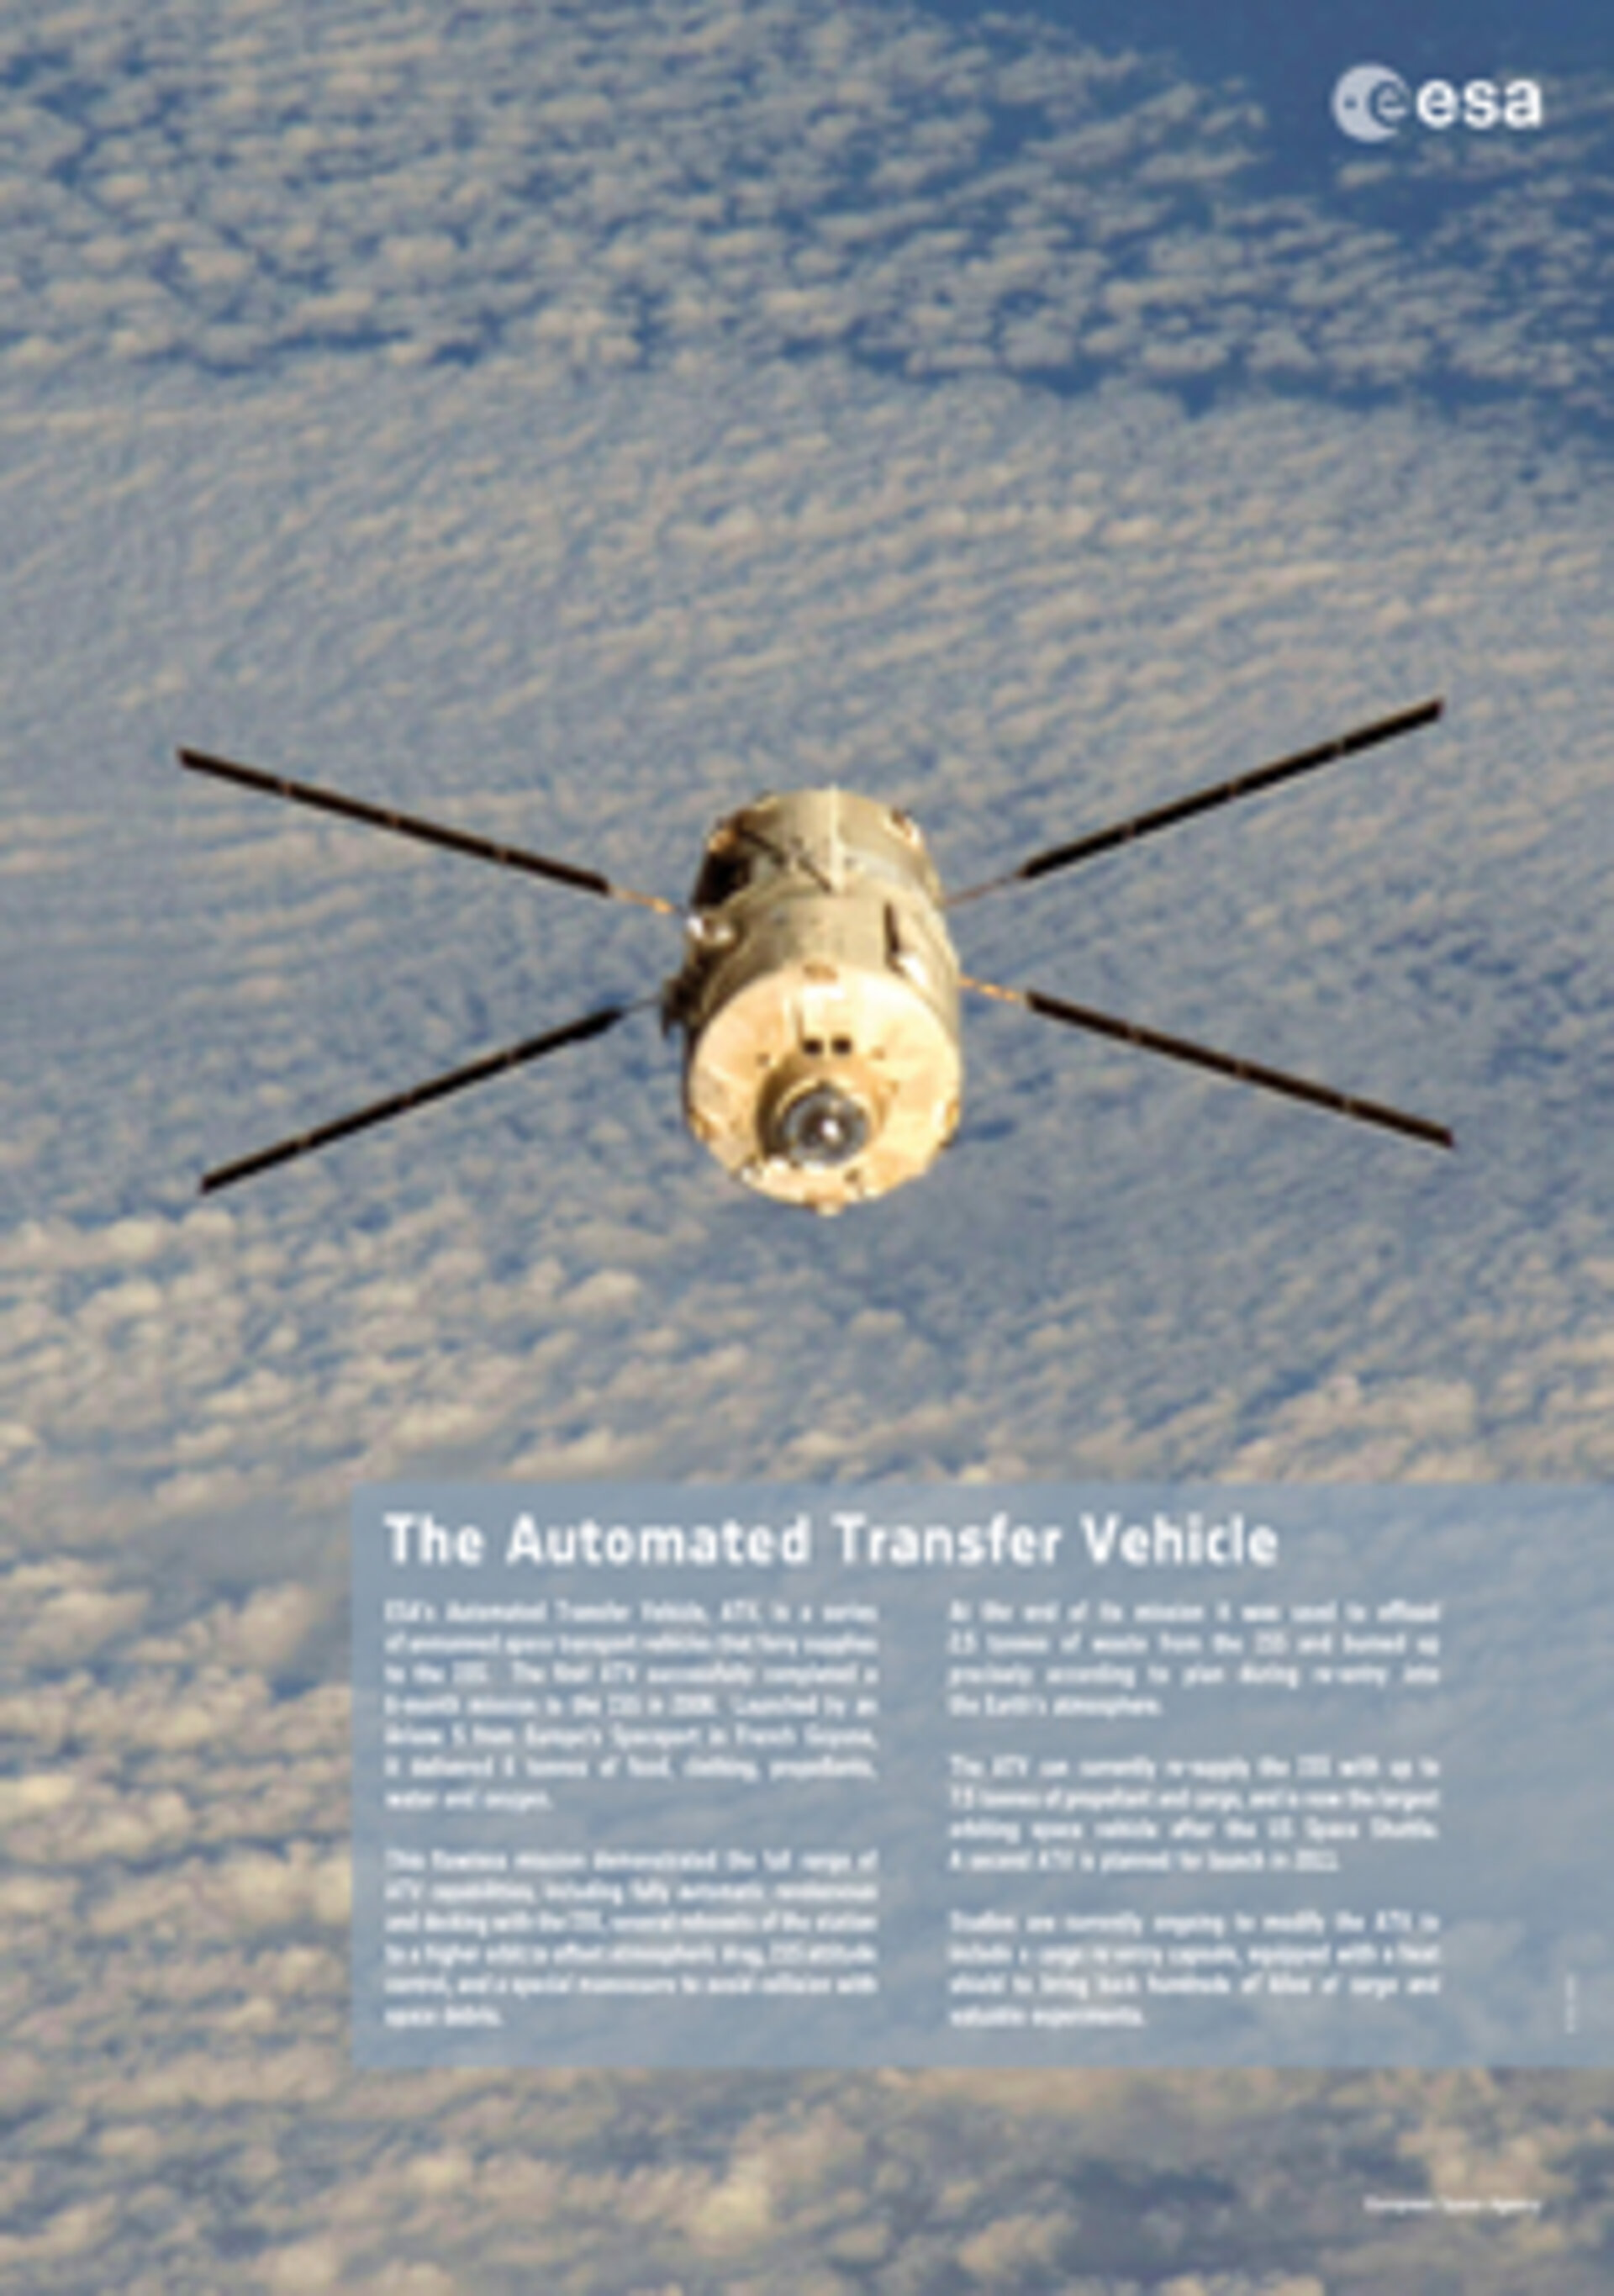 The Automated Transfer Vehicle